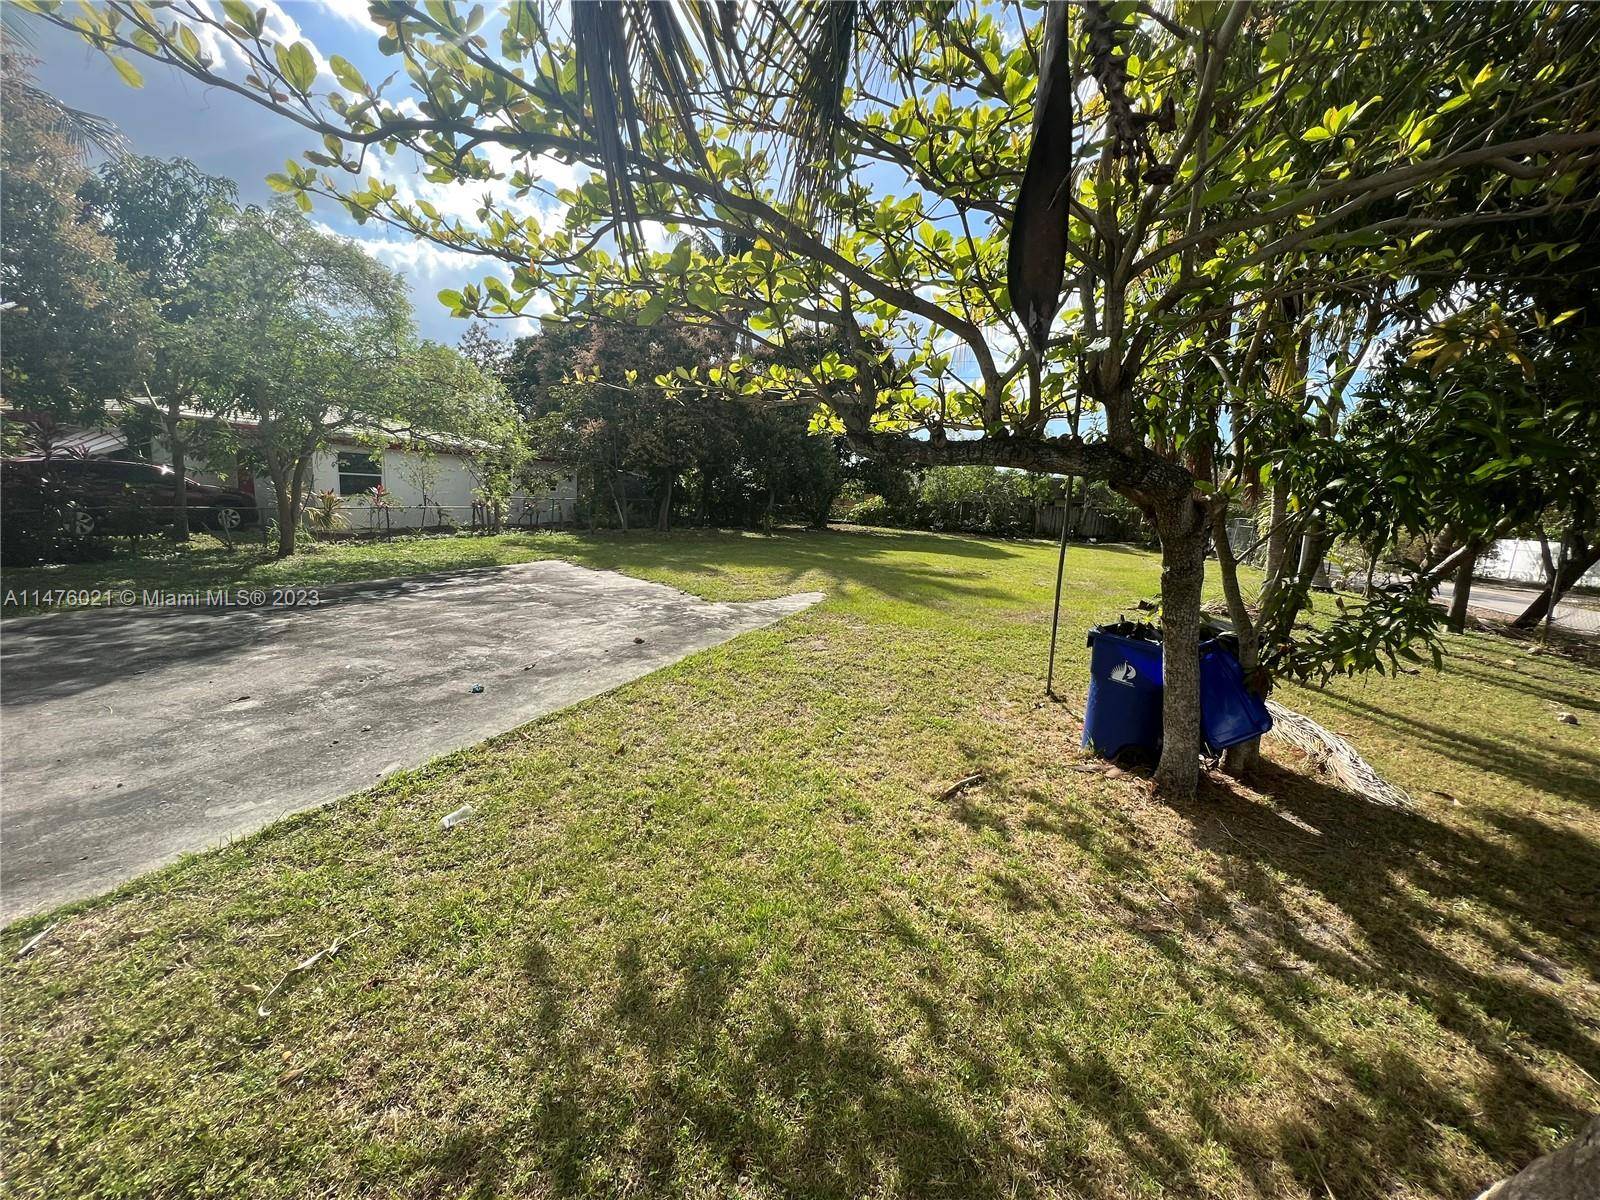 Large corner lot in an Opportunity Zone, located in the fast developing Progresso neighborhood !